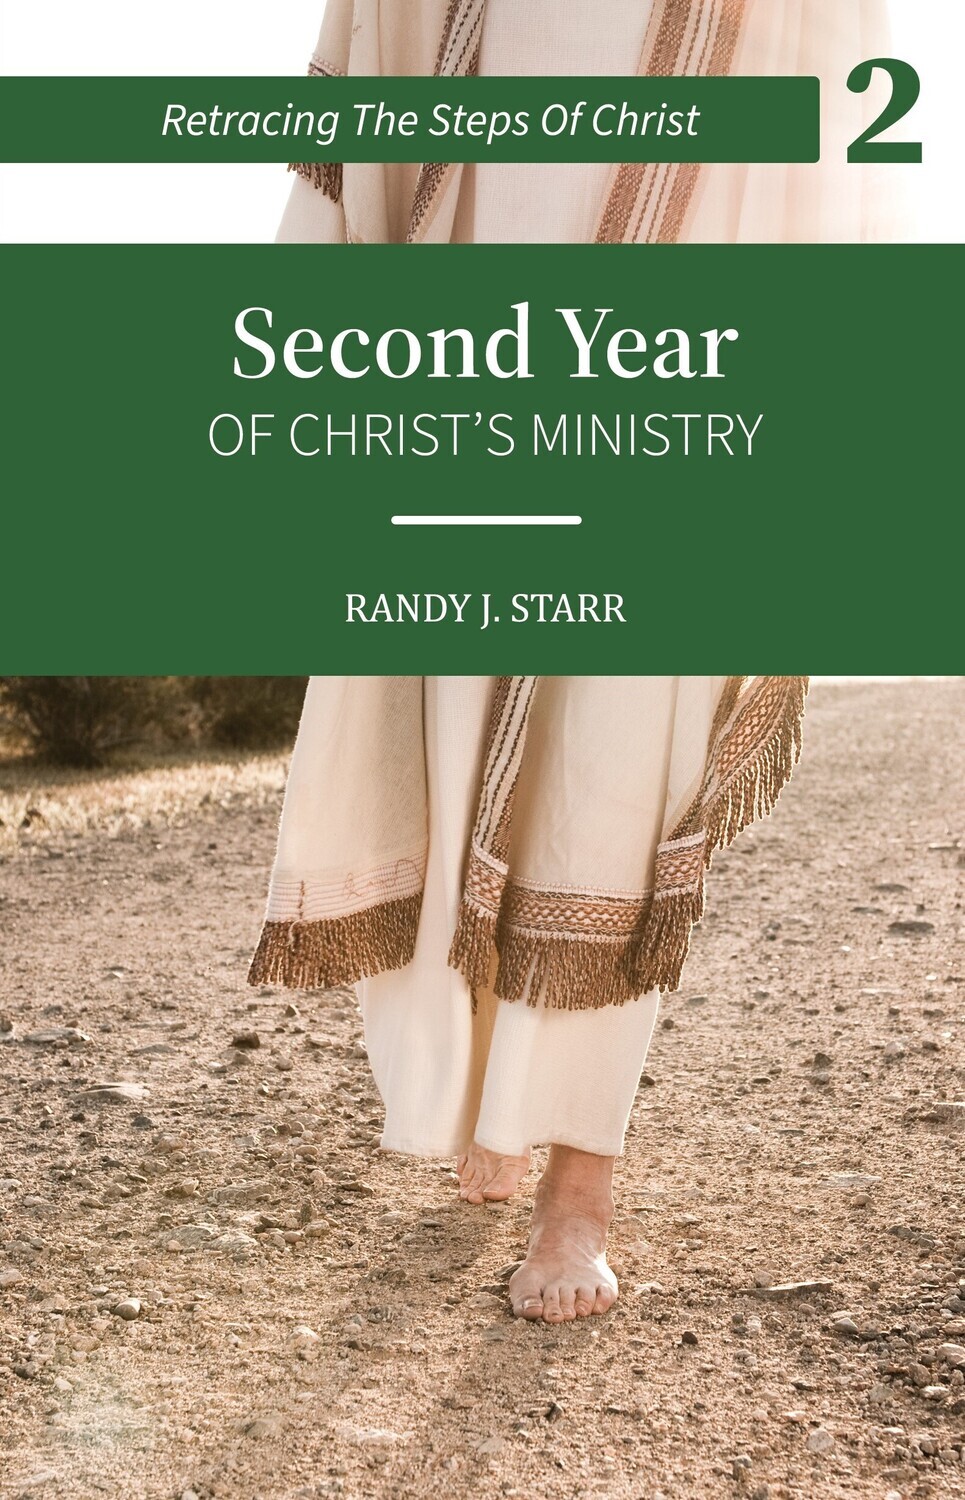 Retracing the Steps of Christ -BOOK 2 of 4 books -Second Year of Christ’s Ministry